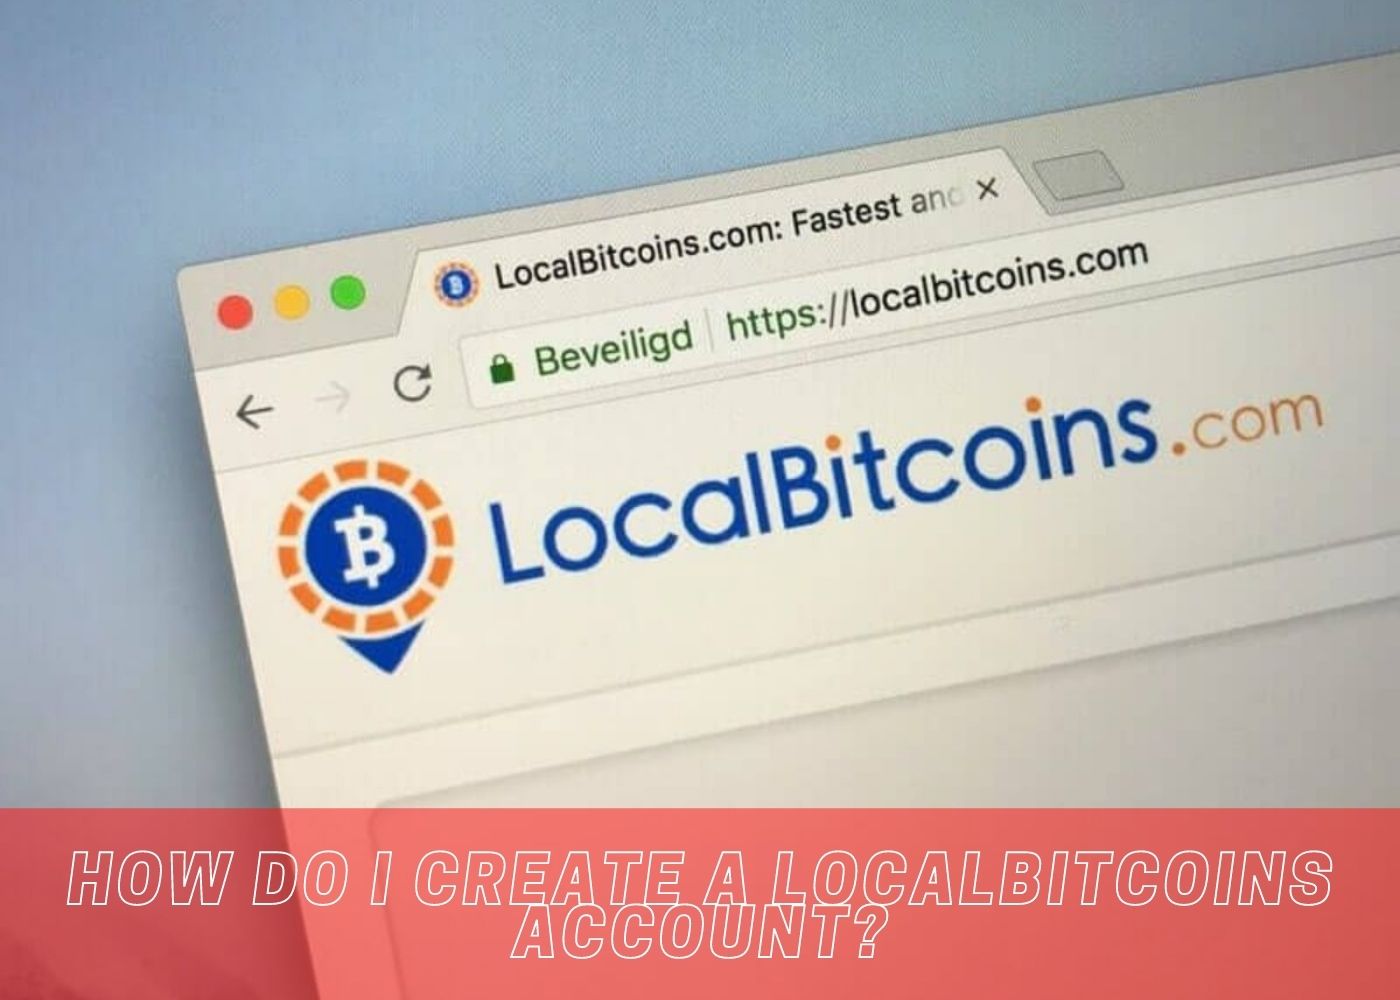 local bitcoins review - Read this before using [Full Guide ]